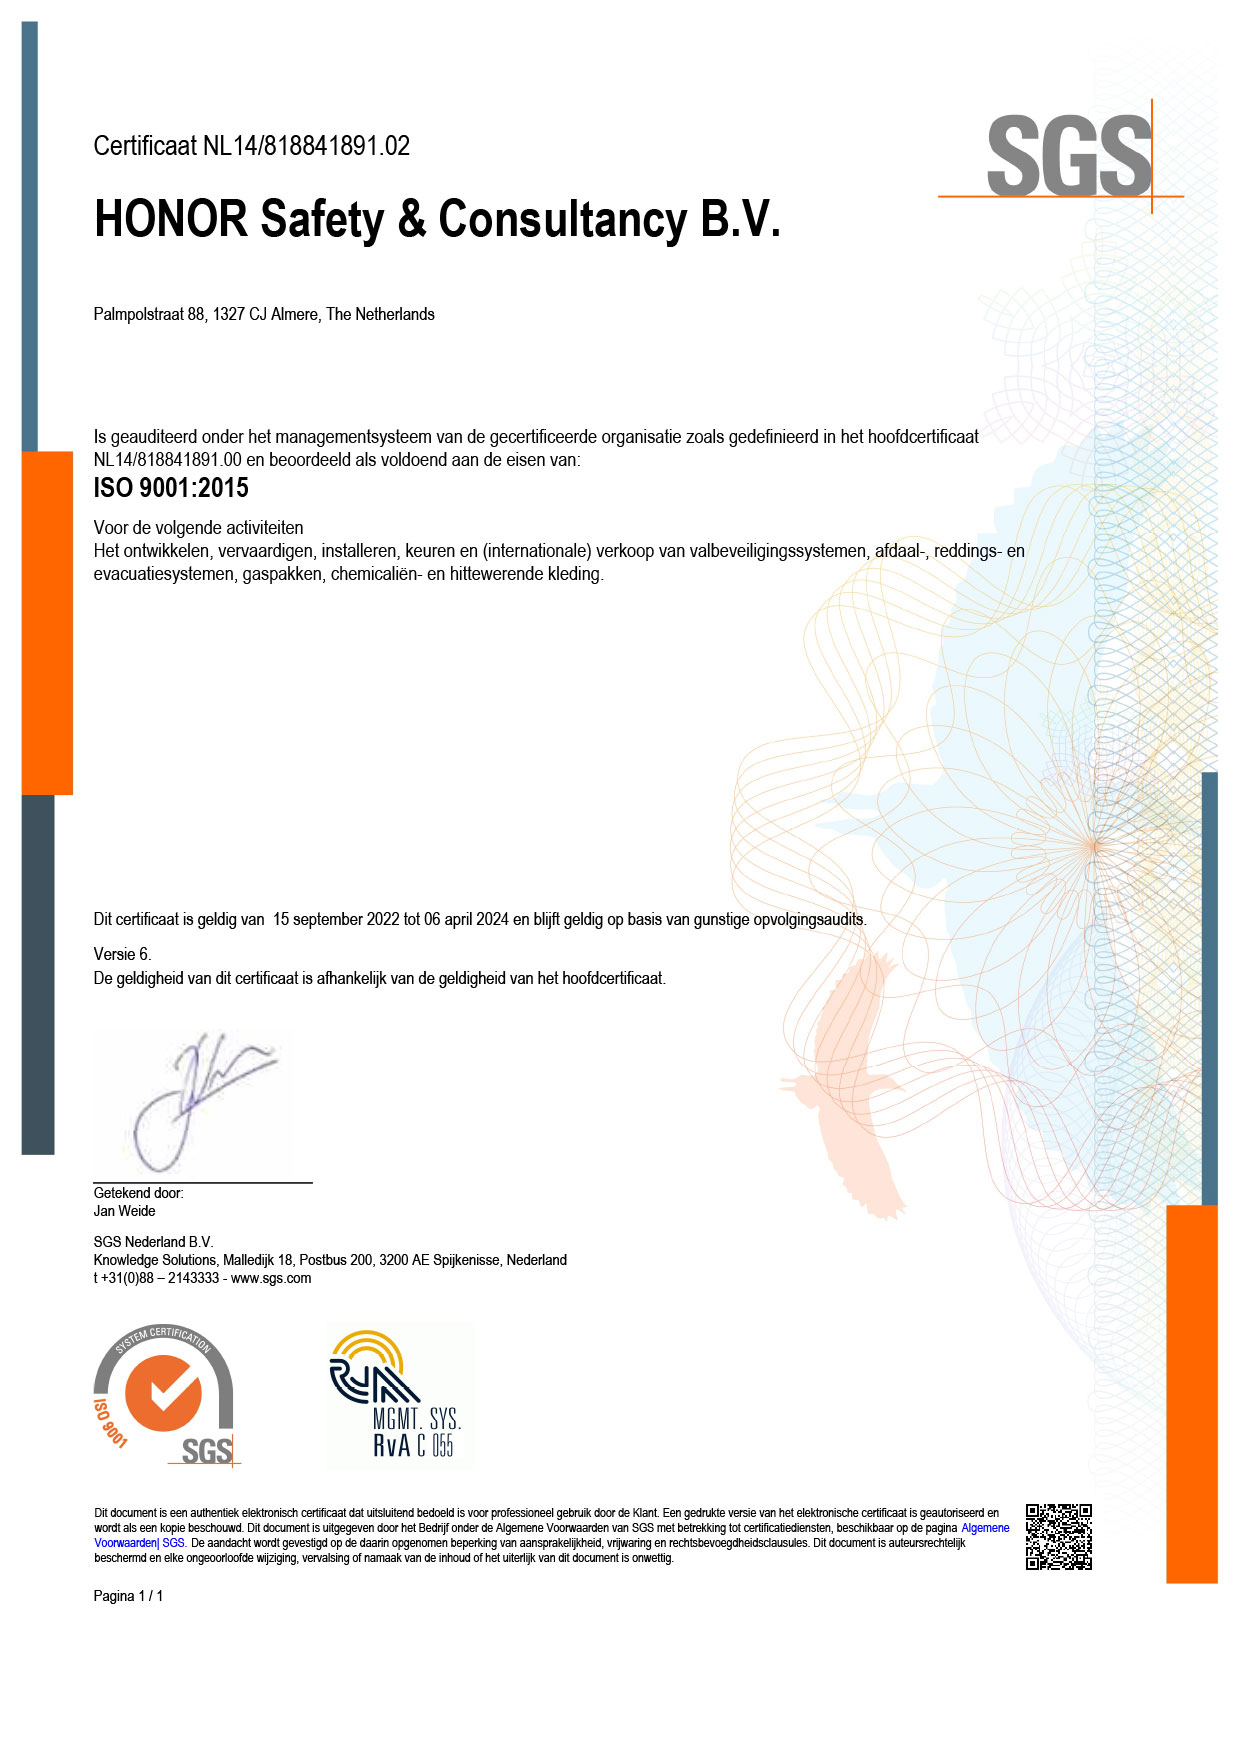 NLITC_000002_GenericCertificate-HONOR-Safety-&-Consultancy-B.V._Final